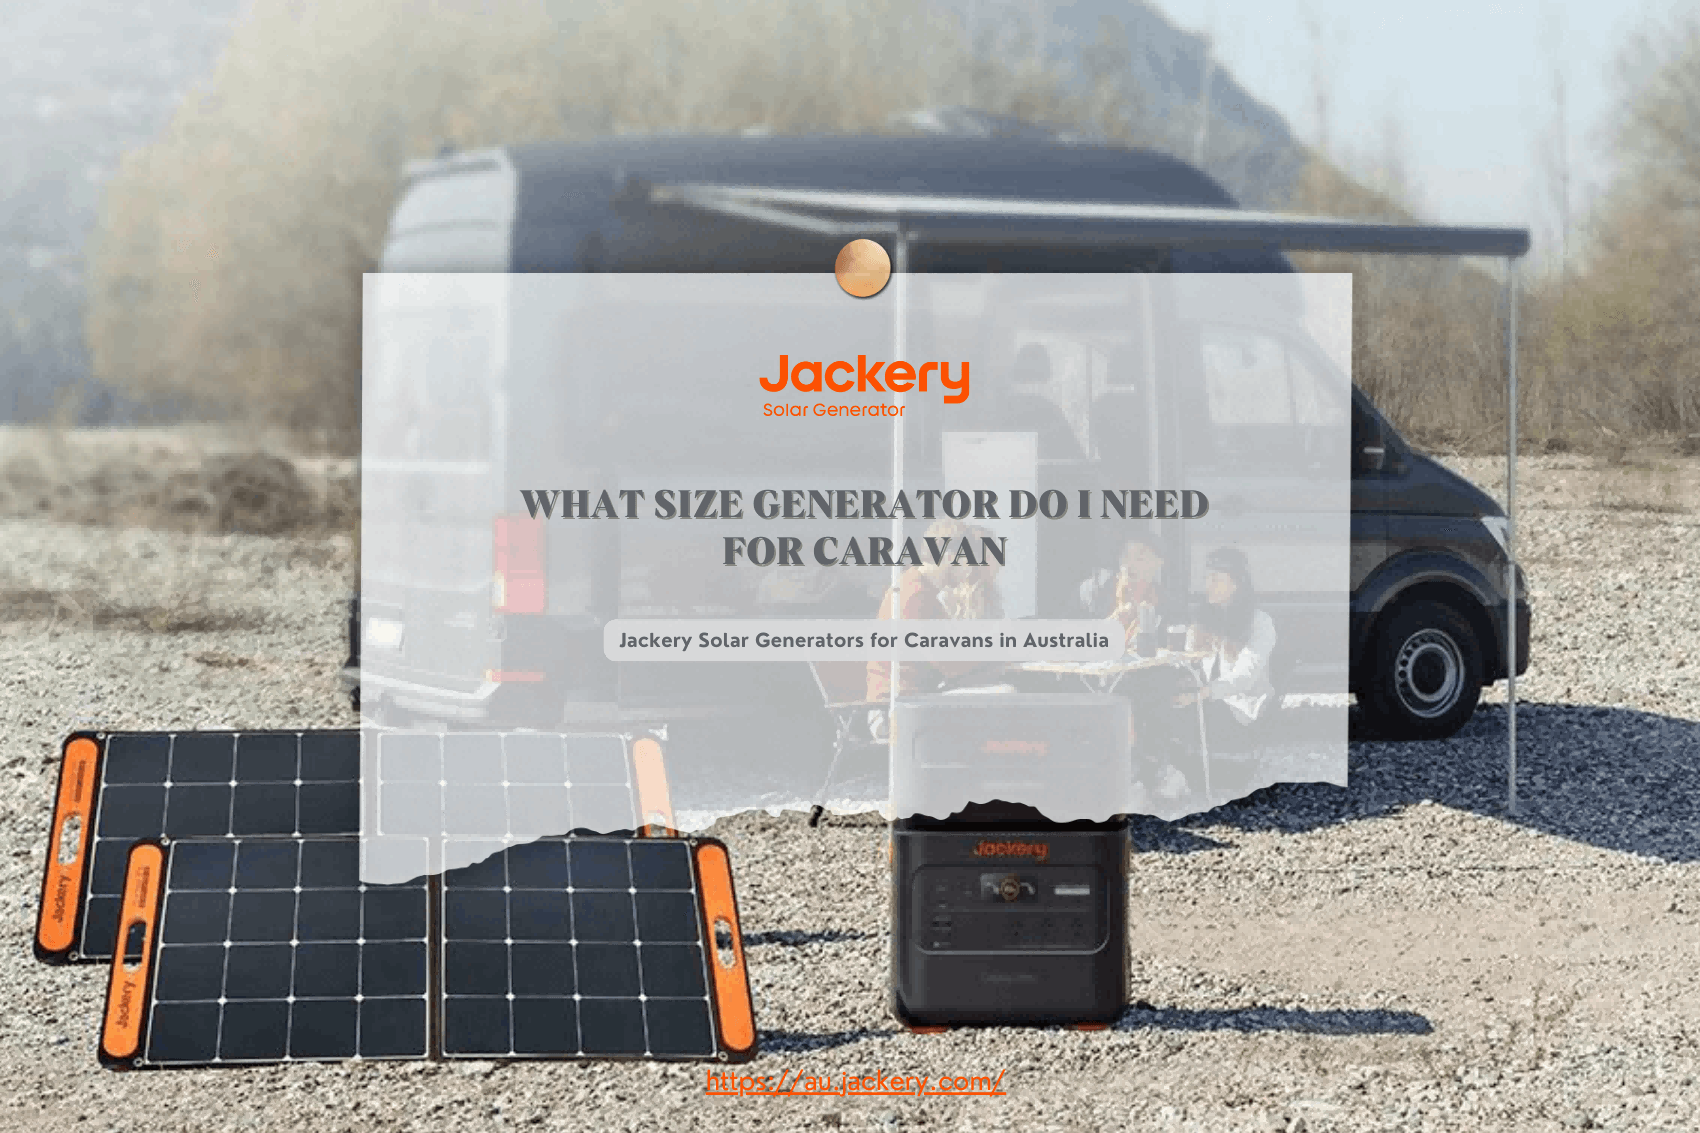 What Size Generator Do I Need for Caravan?